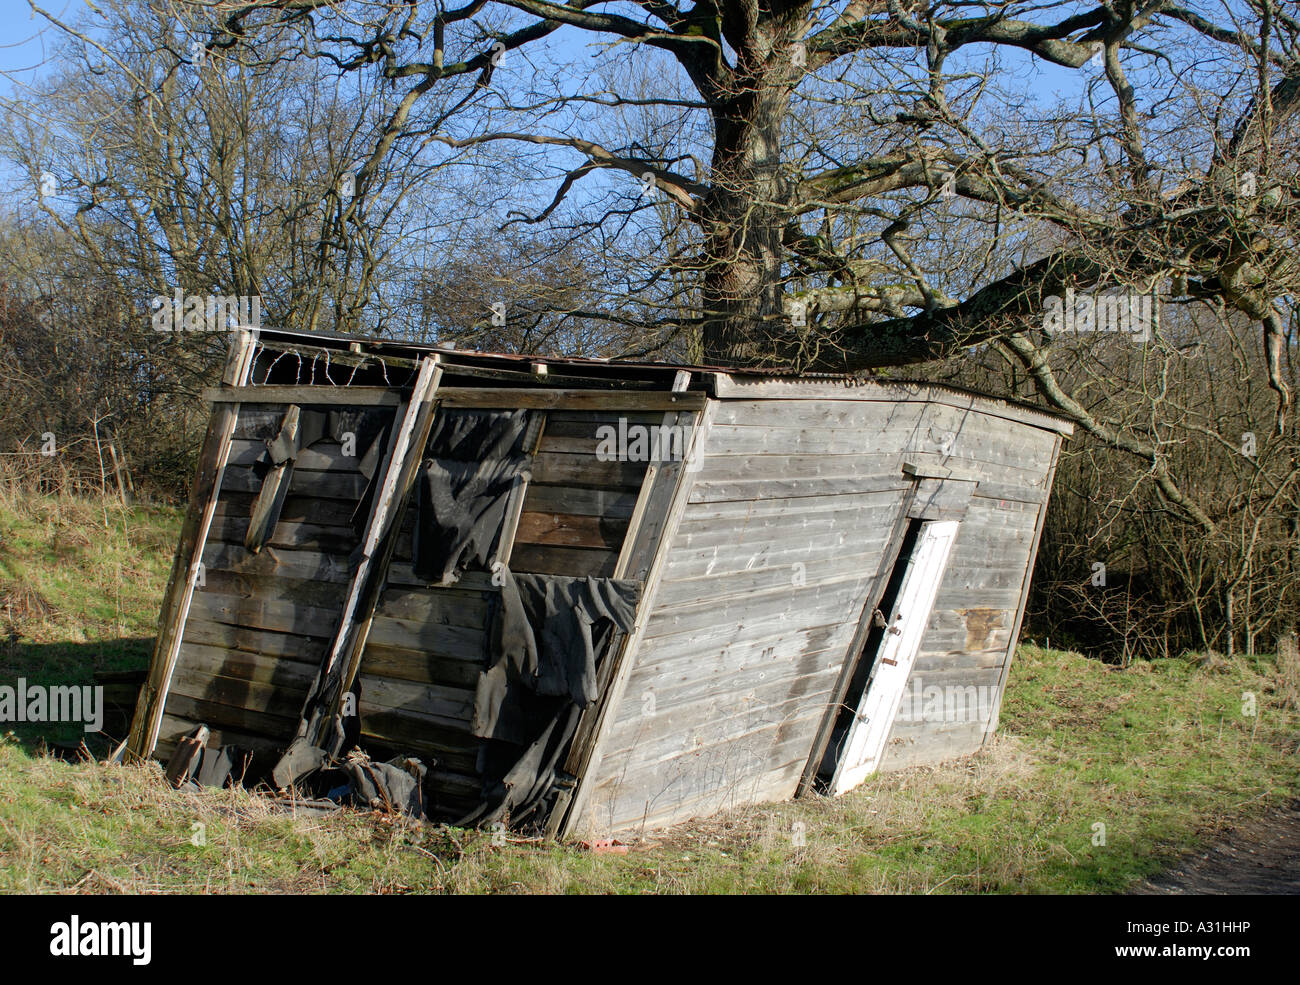 A tumbledown wooden shed by an oak tree leans dangerously at the side of a field Stock Photo